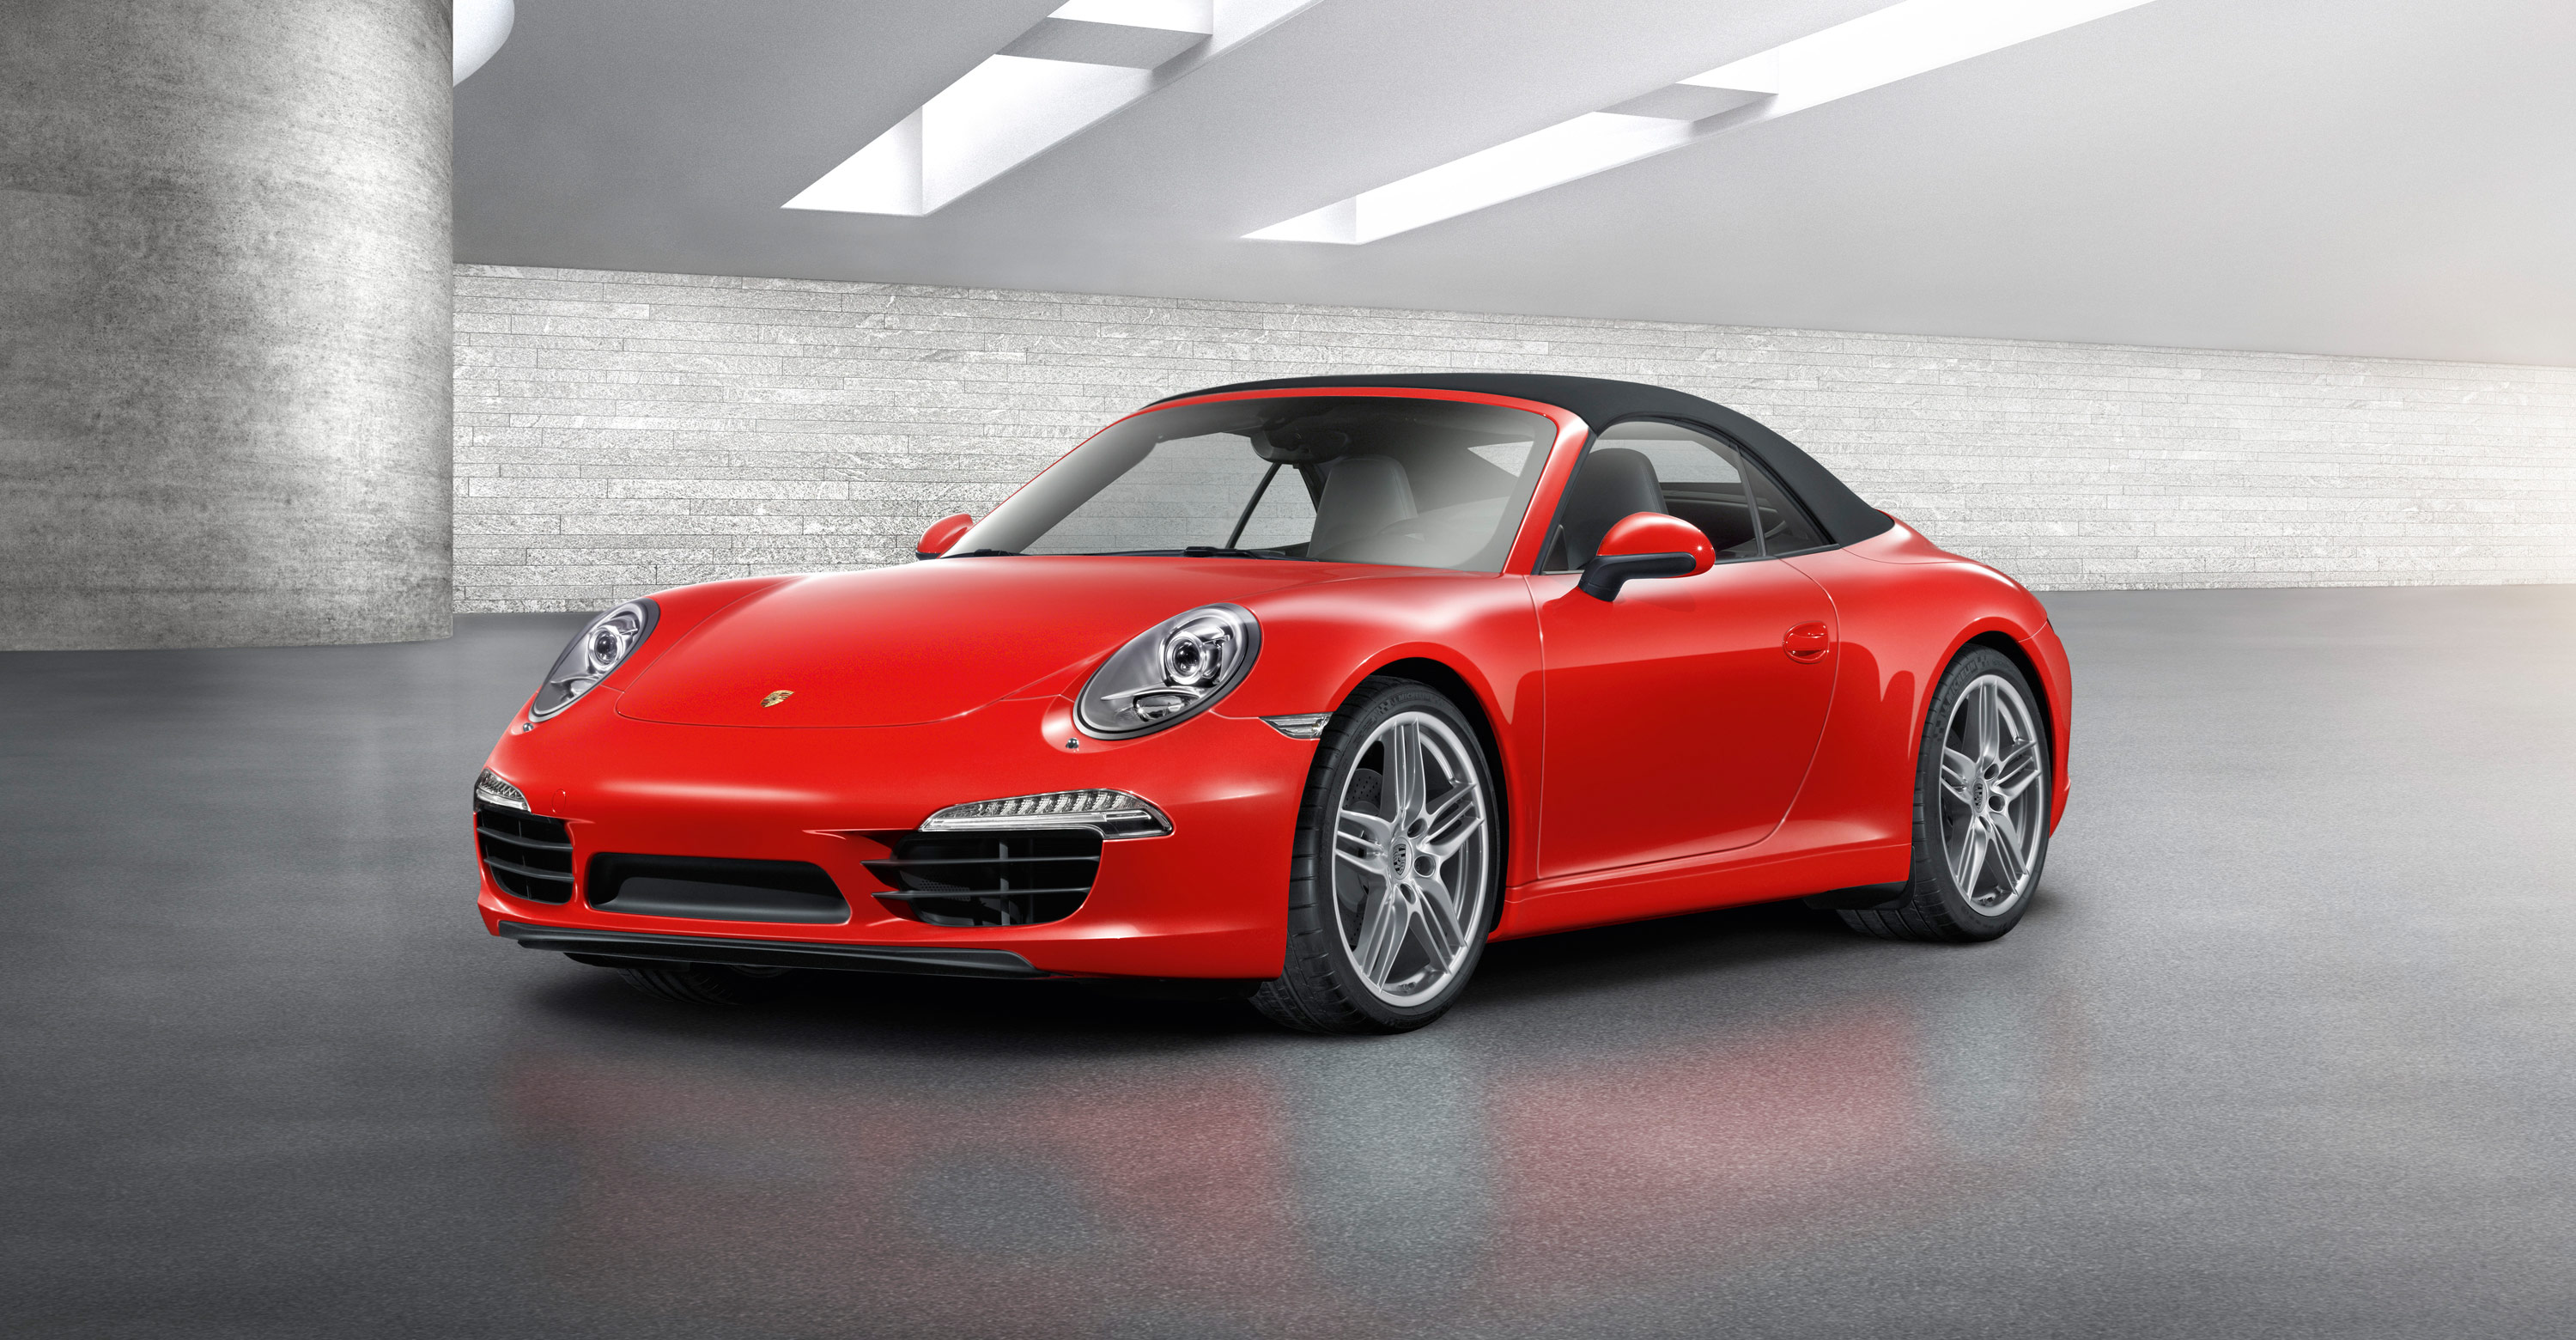 HQ Red Porsche Wallpapers | File 899.46Kb